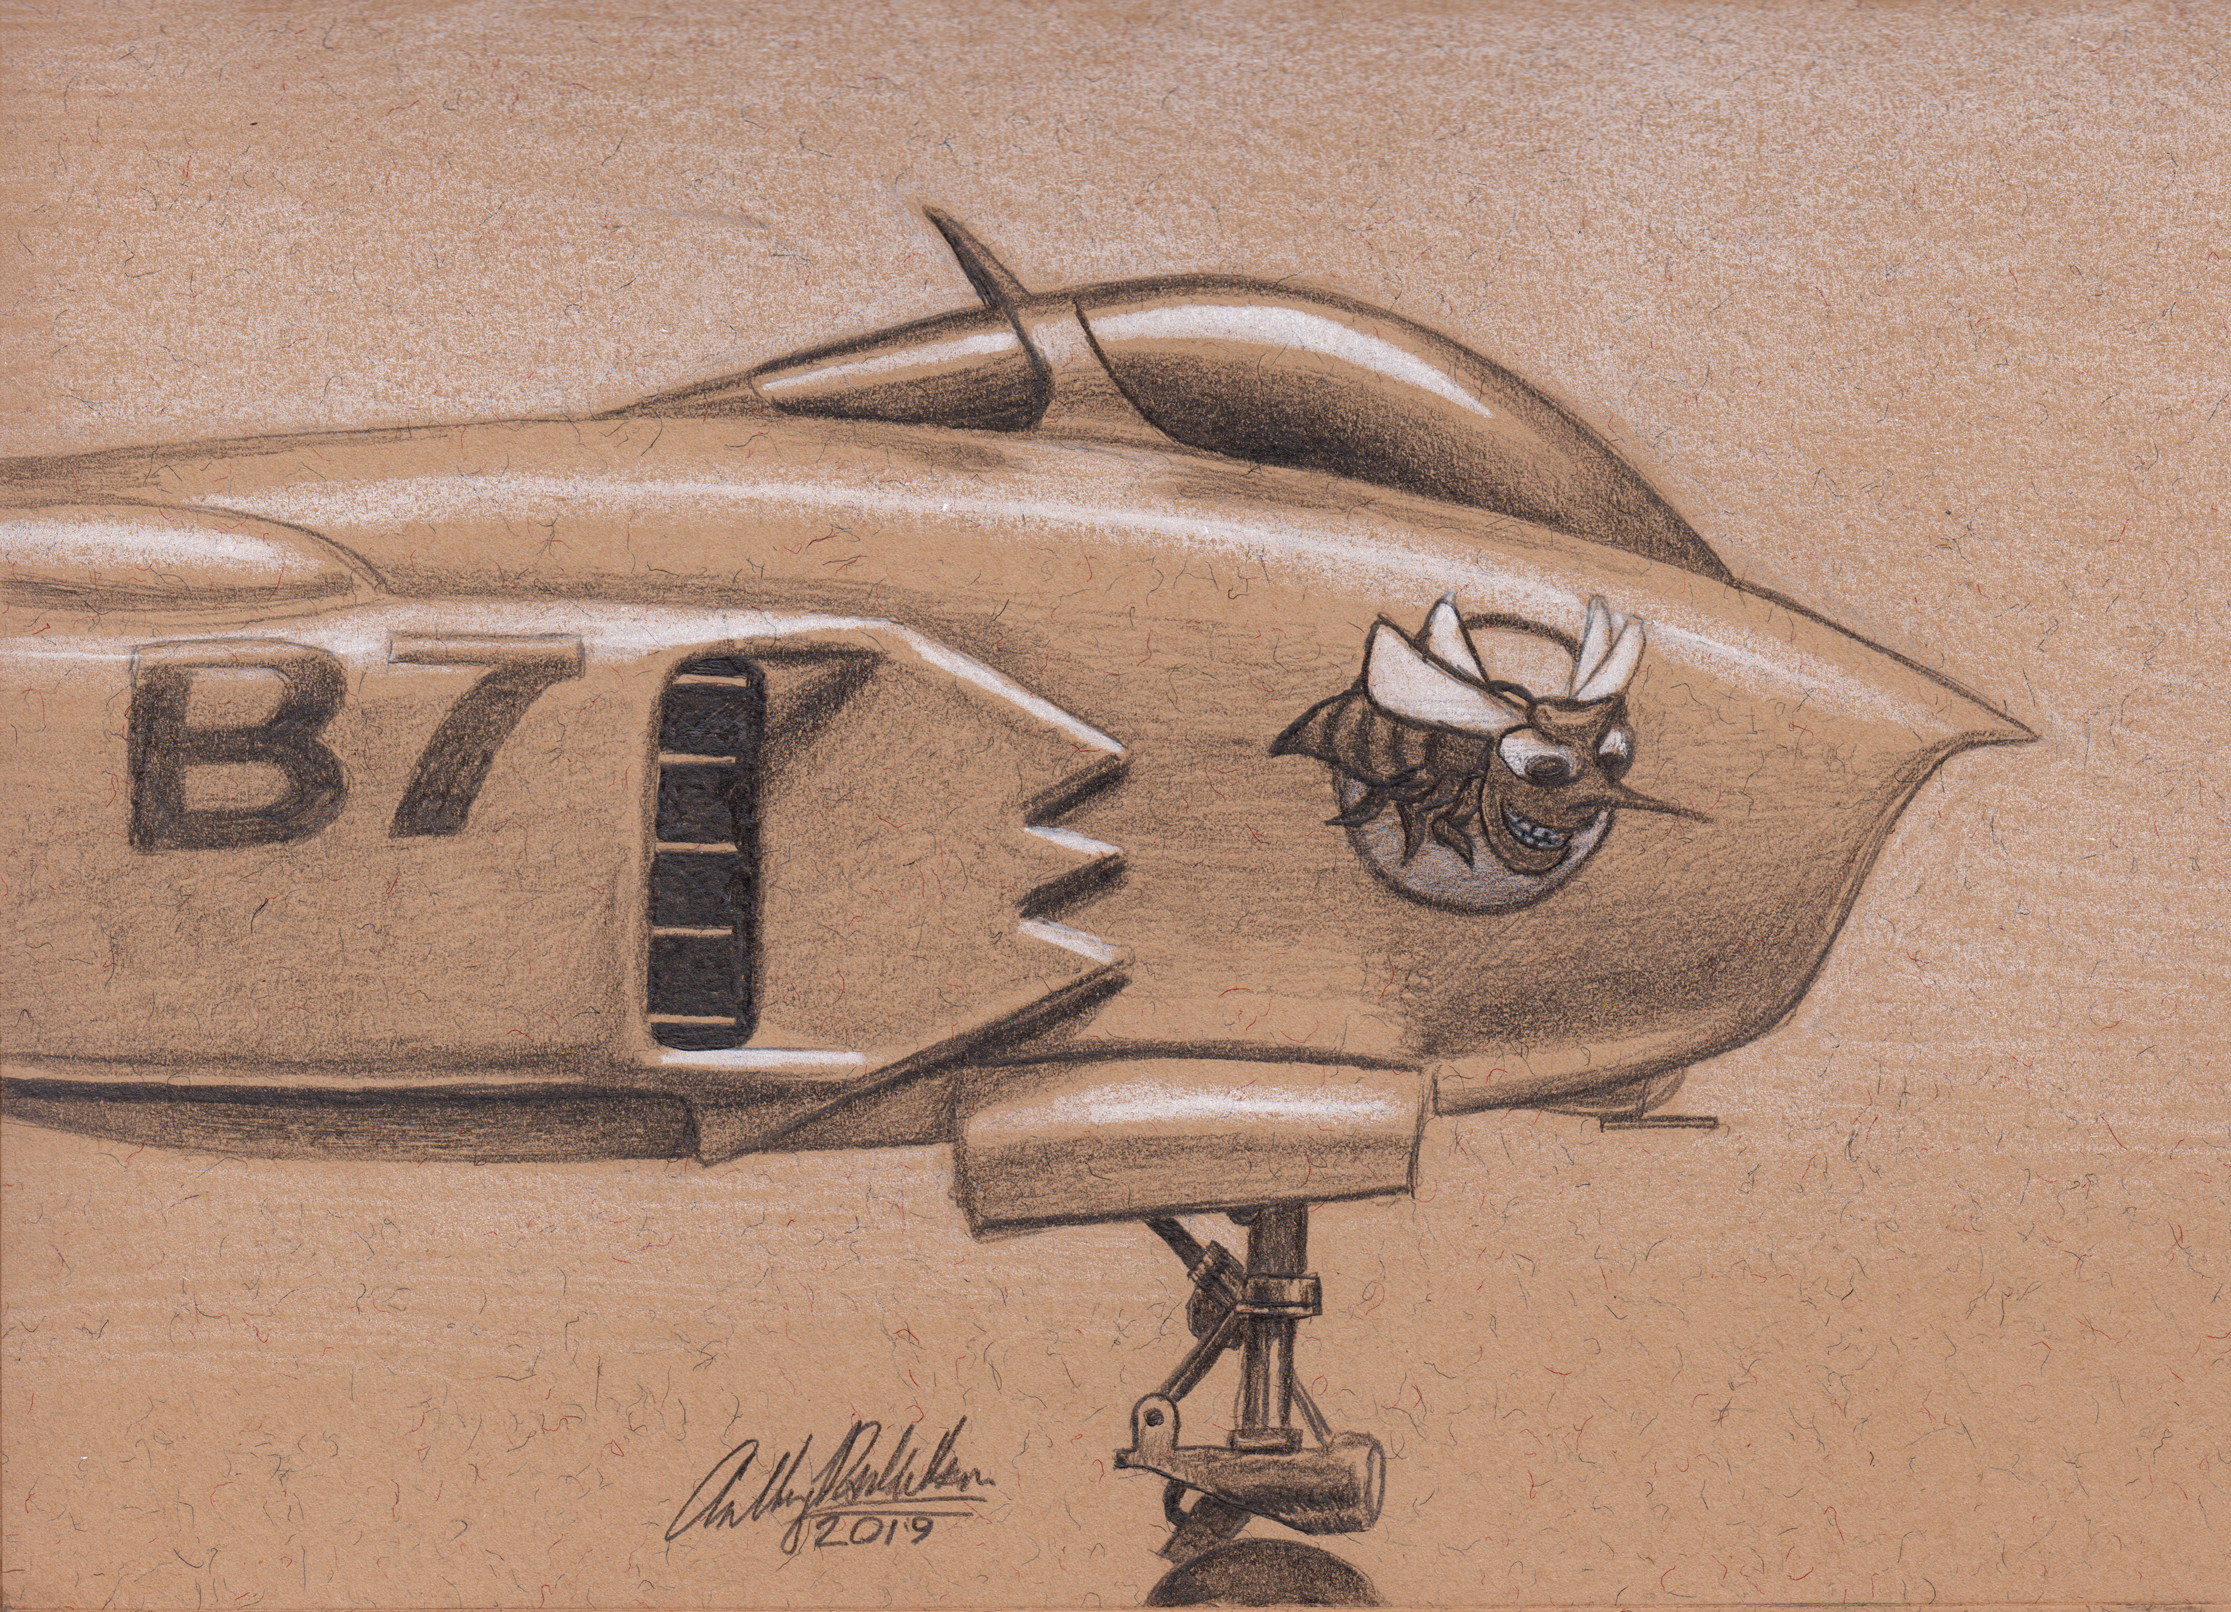 Aircraft Sketch B-7
Pencil on toned paper